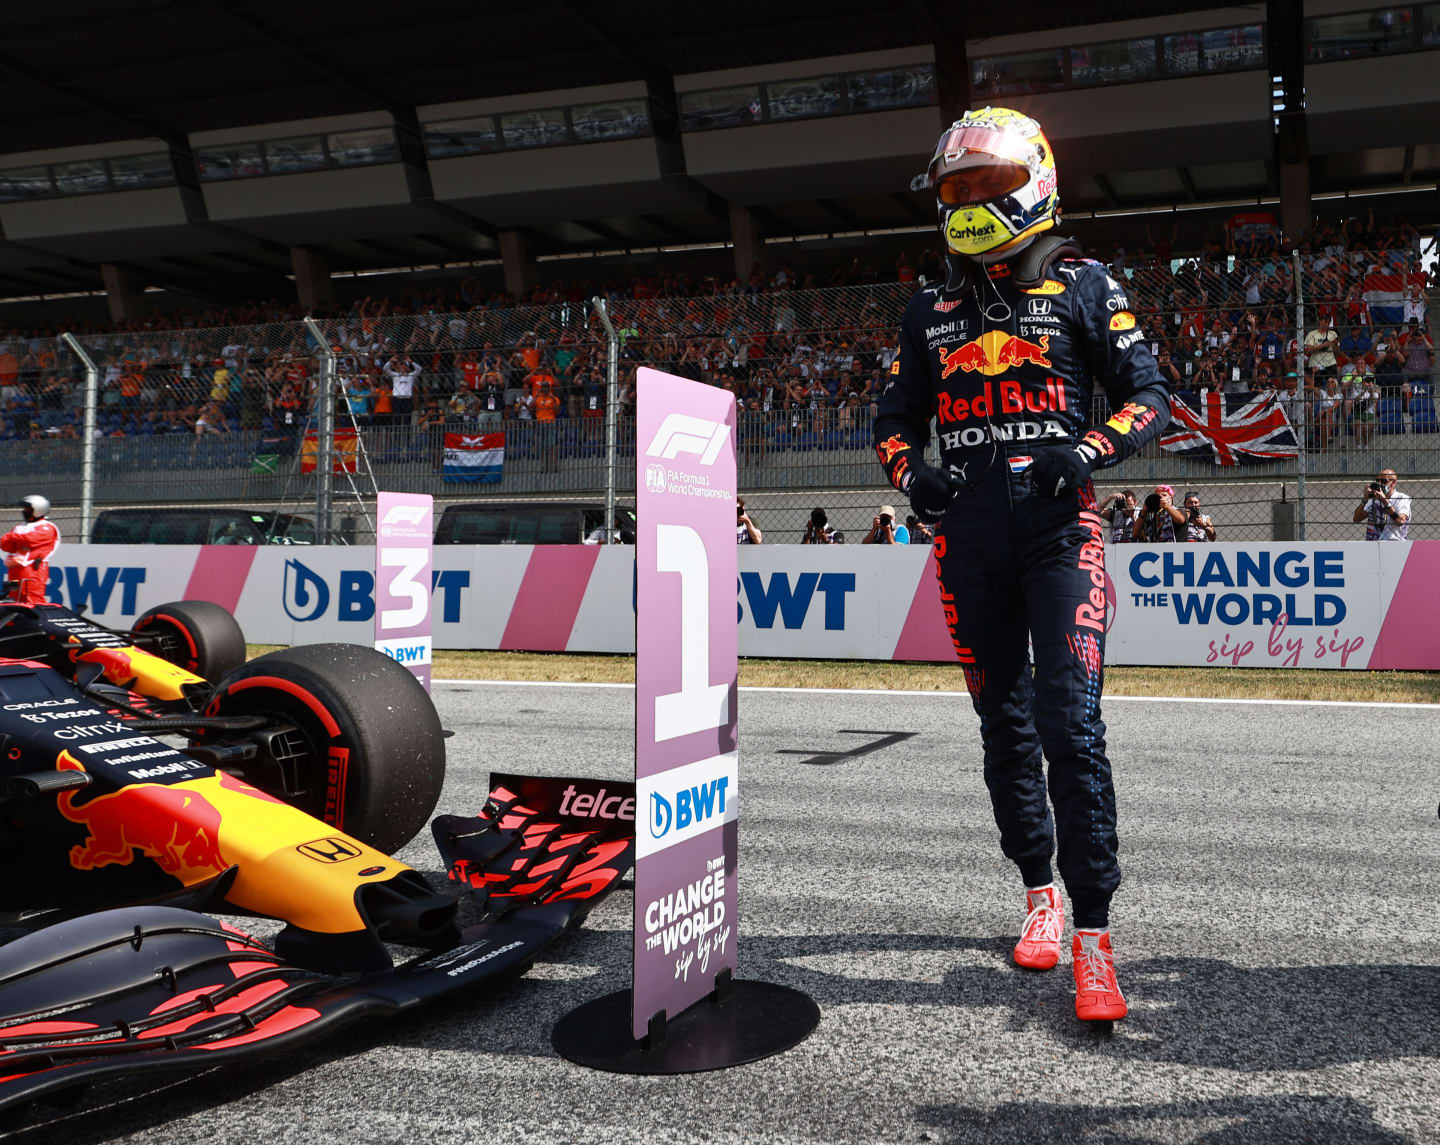 SPIELBERG, AUSTRIA - JULY 03: Pole position qualifier Max Verstappen of Netherlands and Red Bull Racing celebrates in parc ferme during qualifying ahead of the F1 Grand Prix of Austria at Red Bull Ring on July 03, 2021 in Spielberg, Austria. (Photo by Mark Thompson/Getty Images)